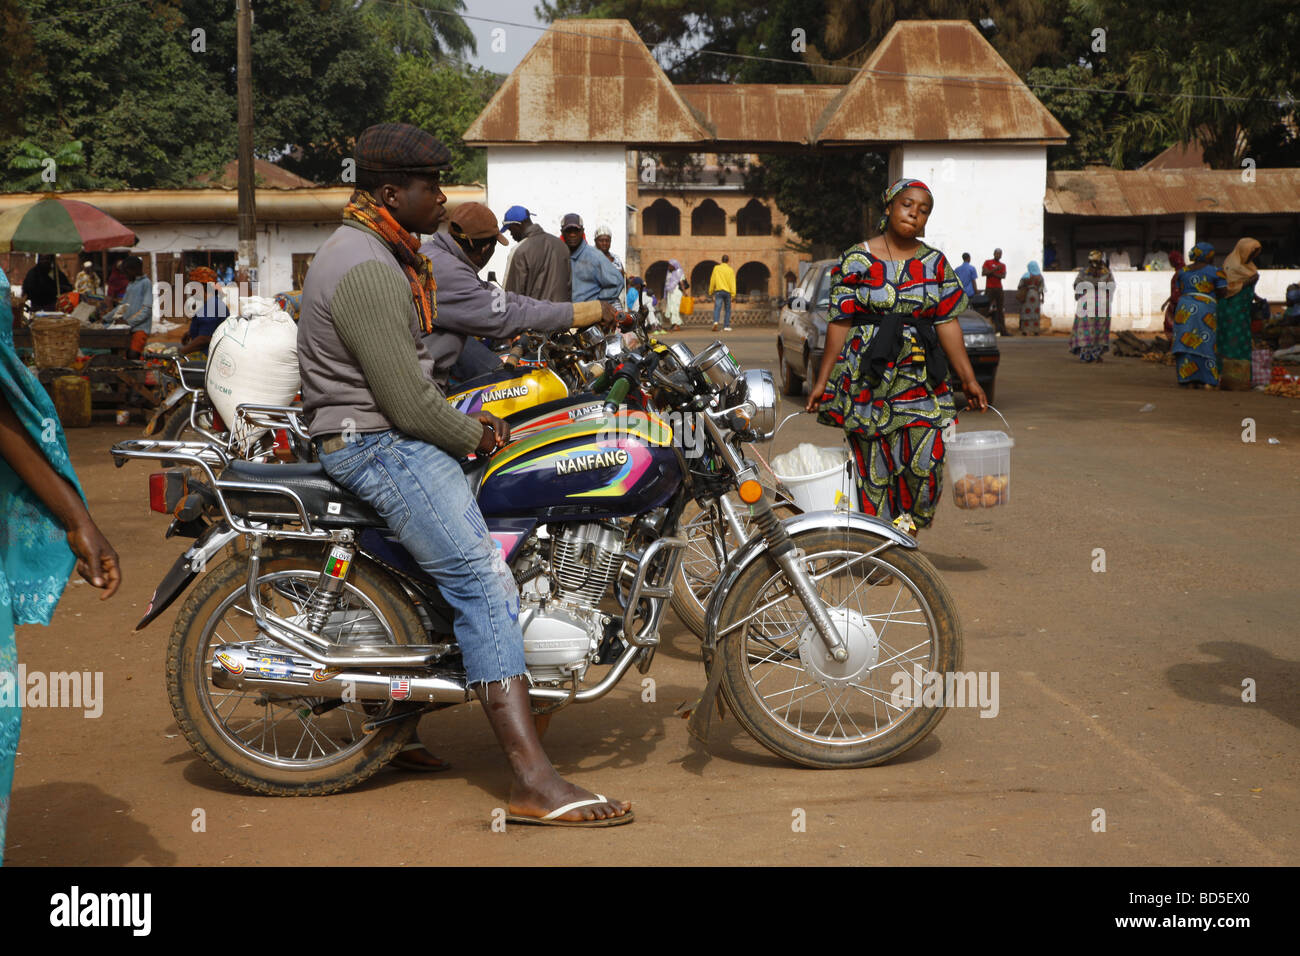 Man with motorcycle on the market, Sultan's Palace, Foumban, Cameroon, Africa Stock Photo